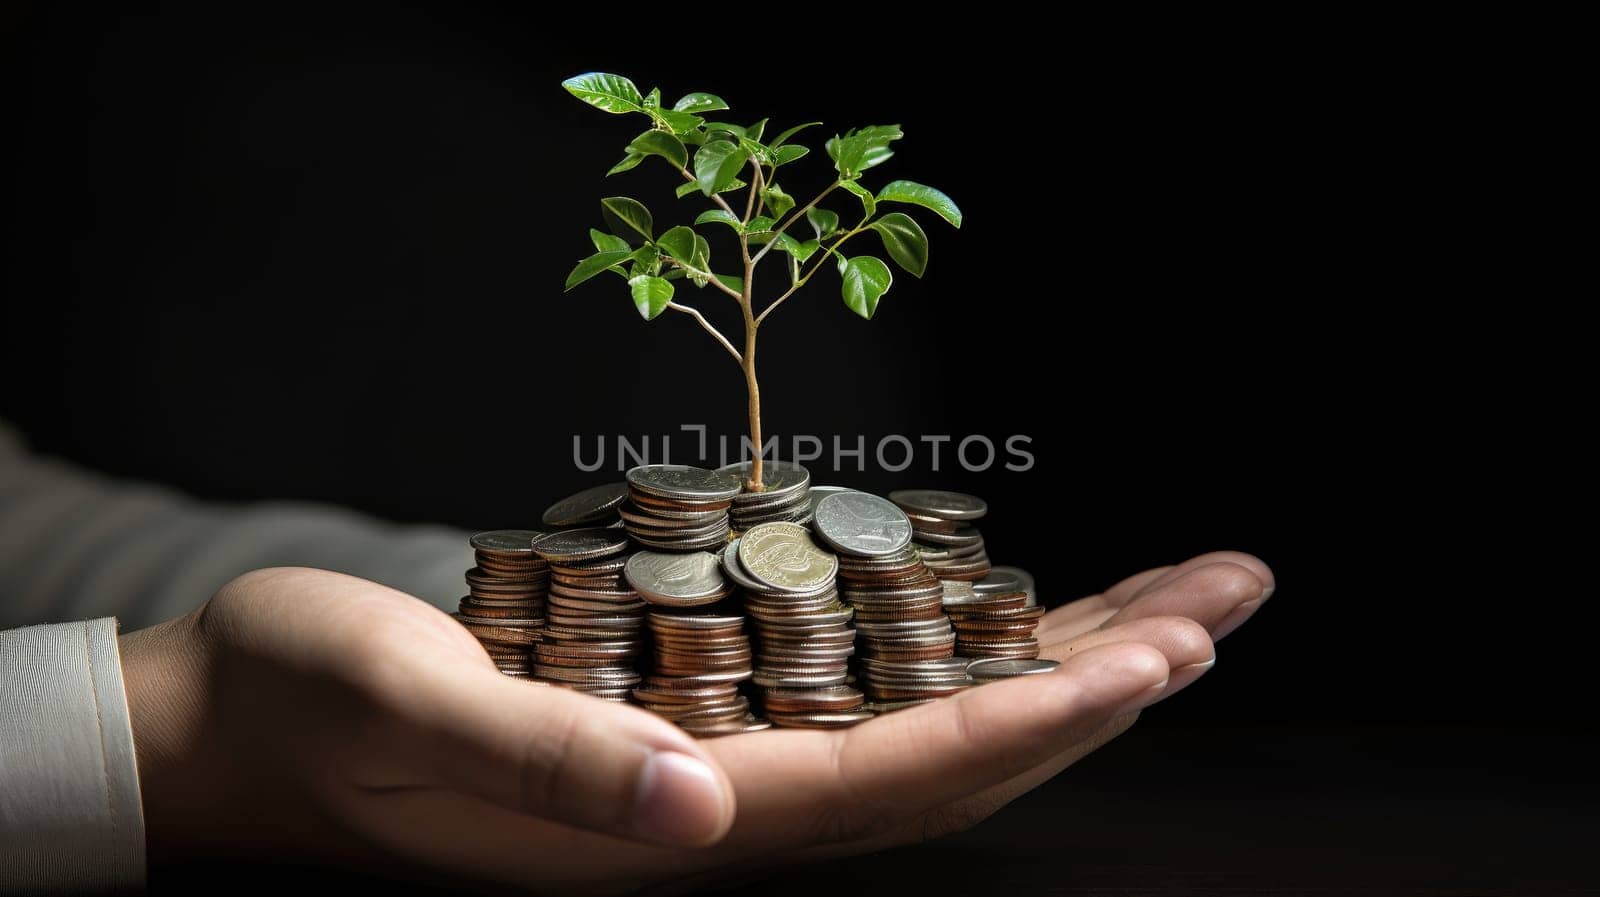 Sapling Grows on a Hand Holding Silver Coins. Green Business Ideas, Carbon Credits, and Innovative Investment in Eco-Friendly Initiatives. Concept of Environmentally Responsible Finance and Growth. by ViShark